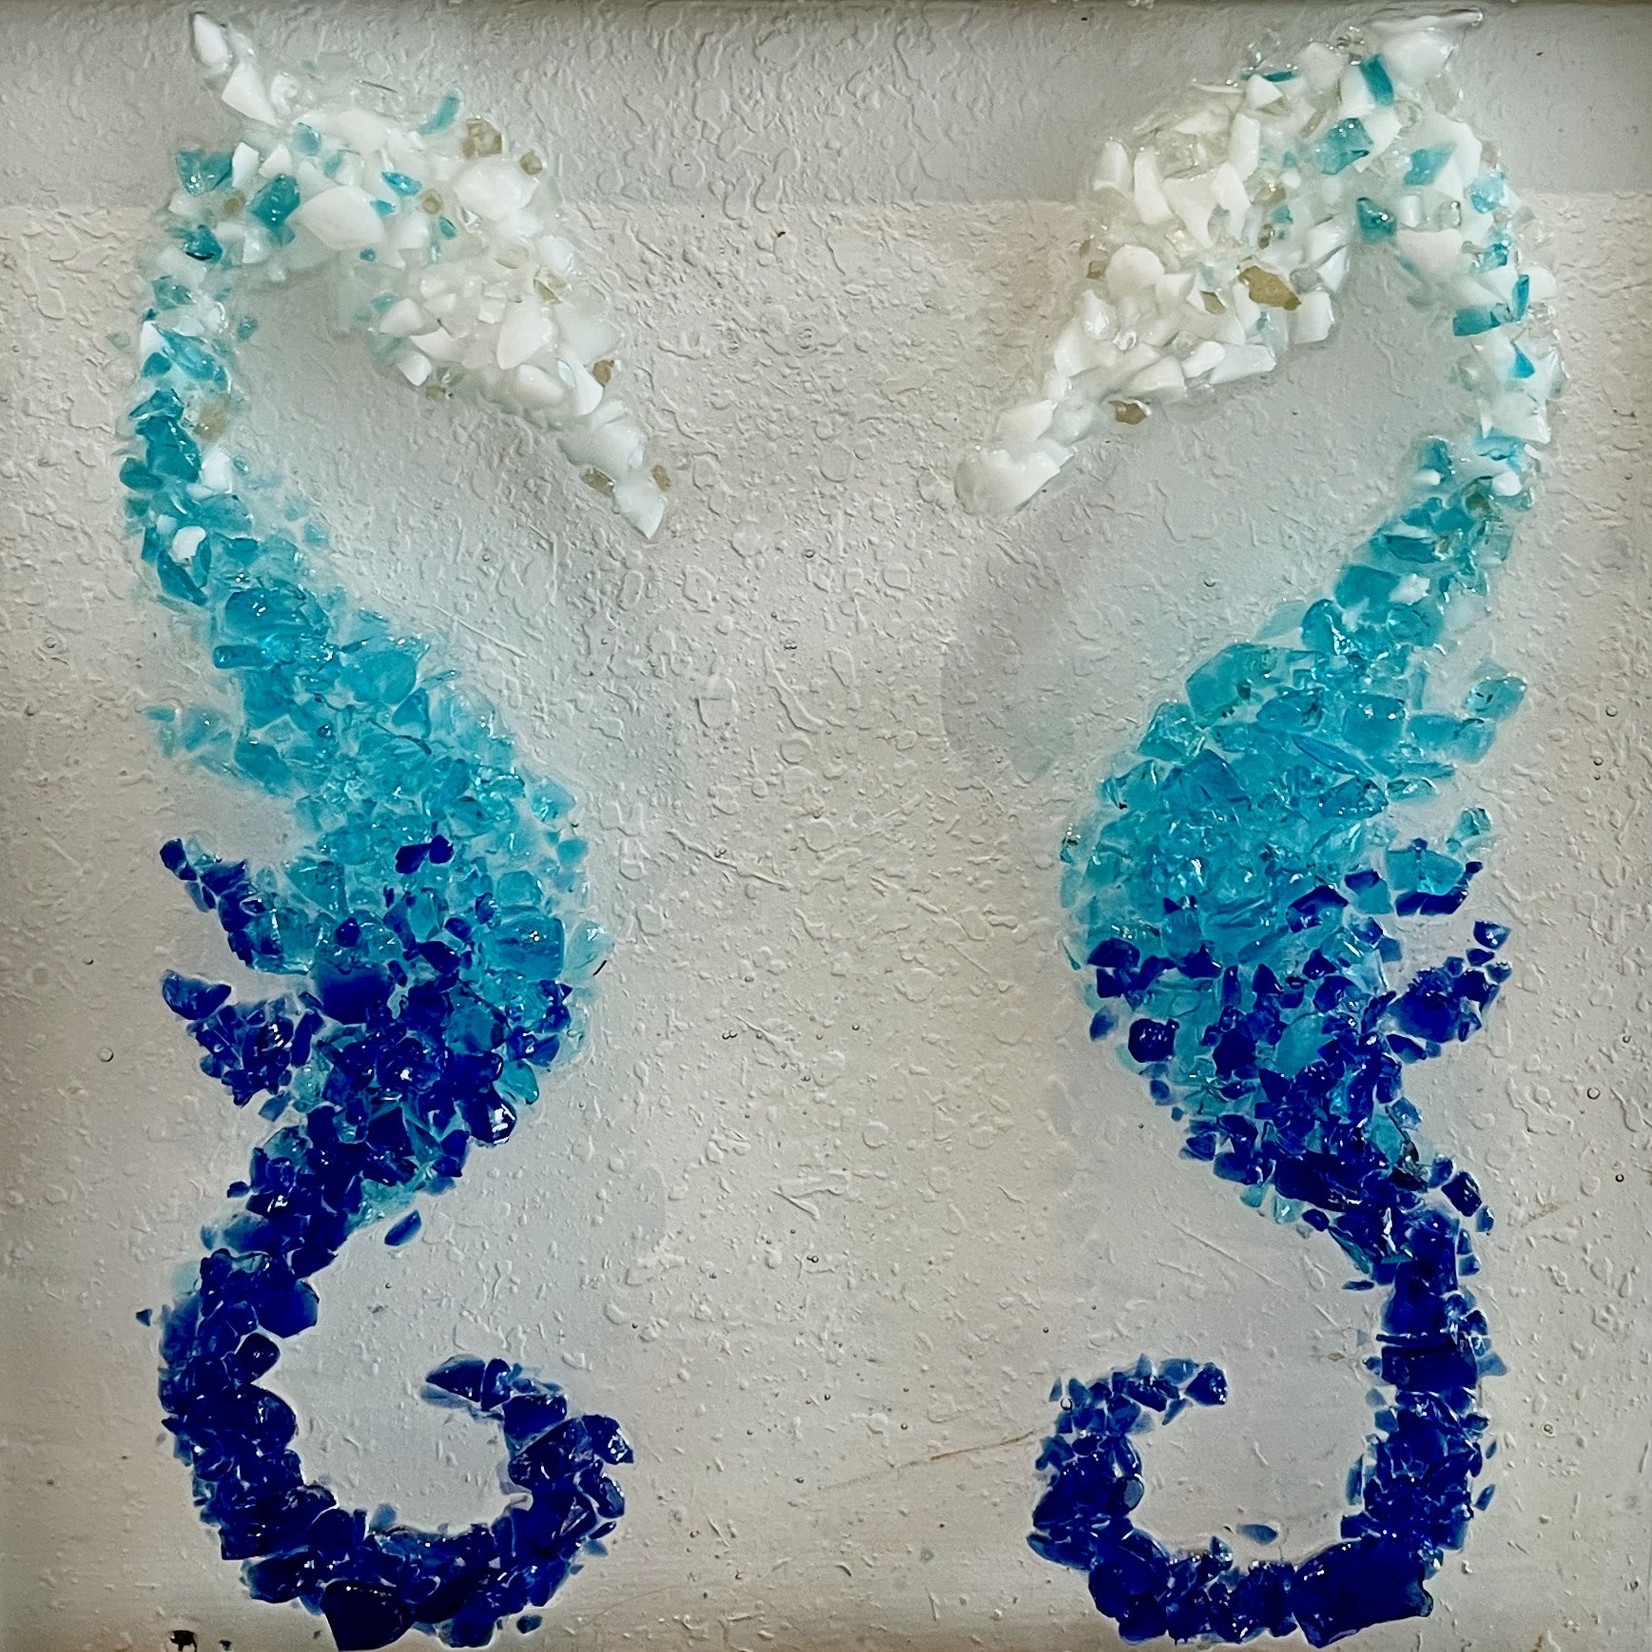 Sue by the Seashore Ombre Seahorses in blue, crushed glass, 17.5x17.5" framed, SUES